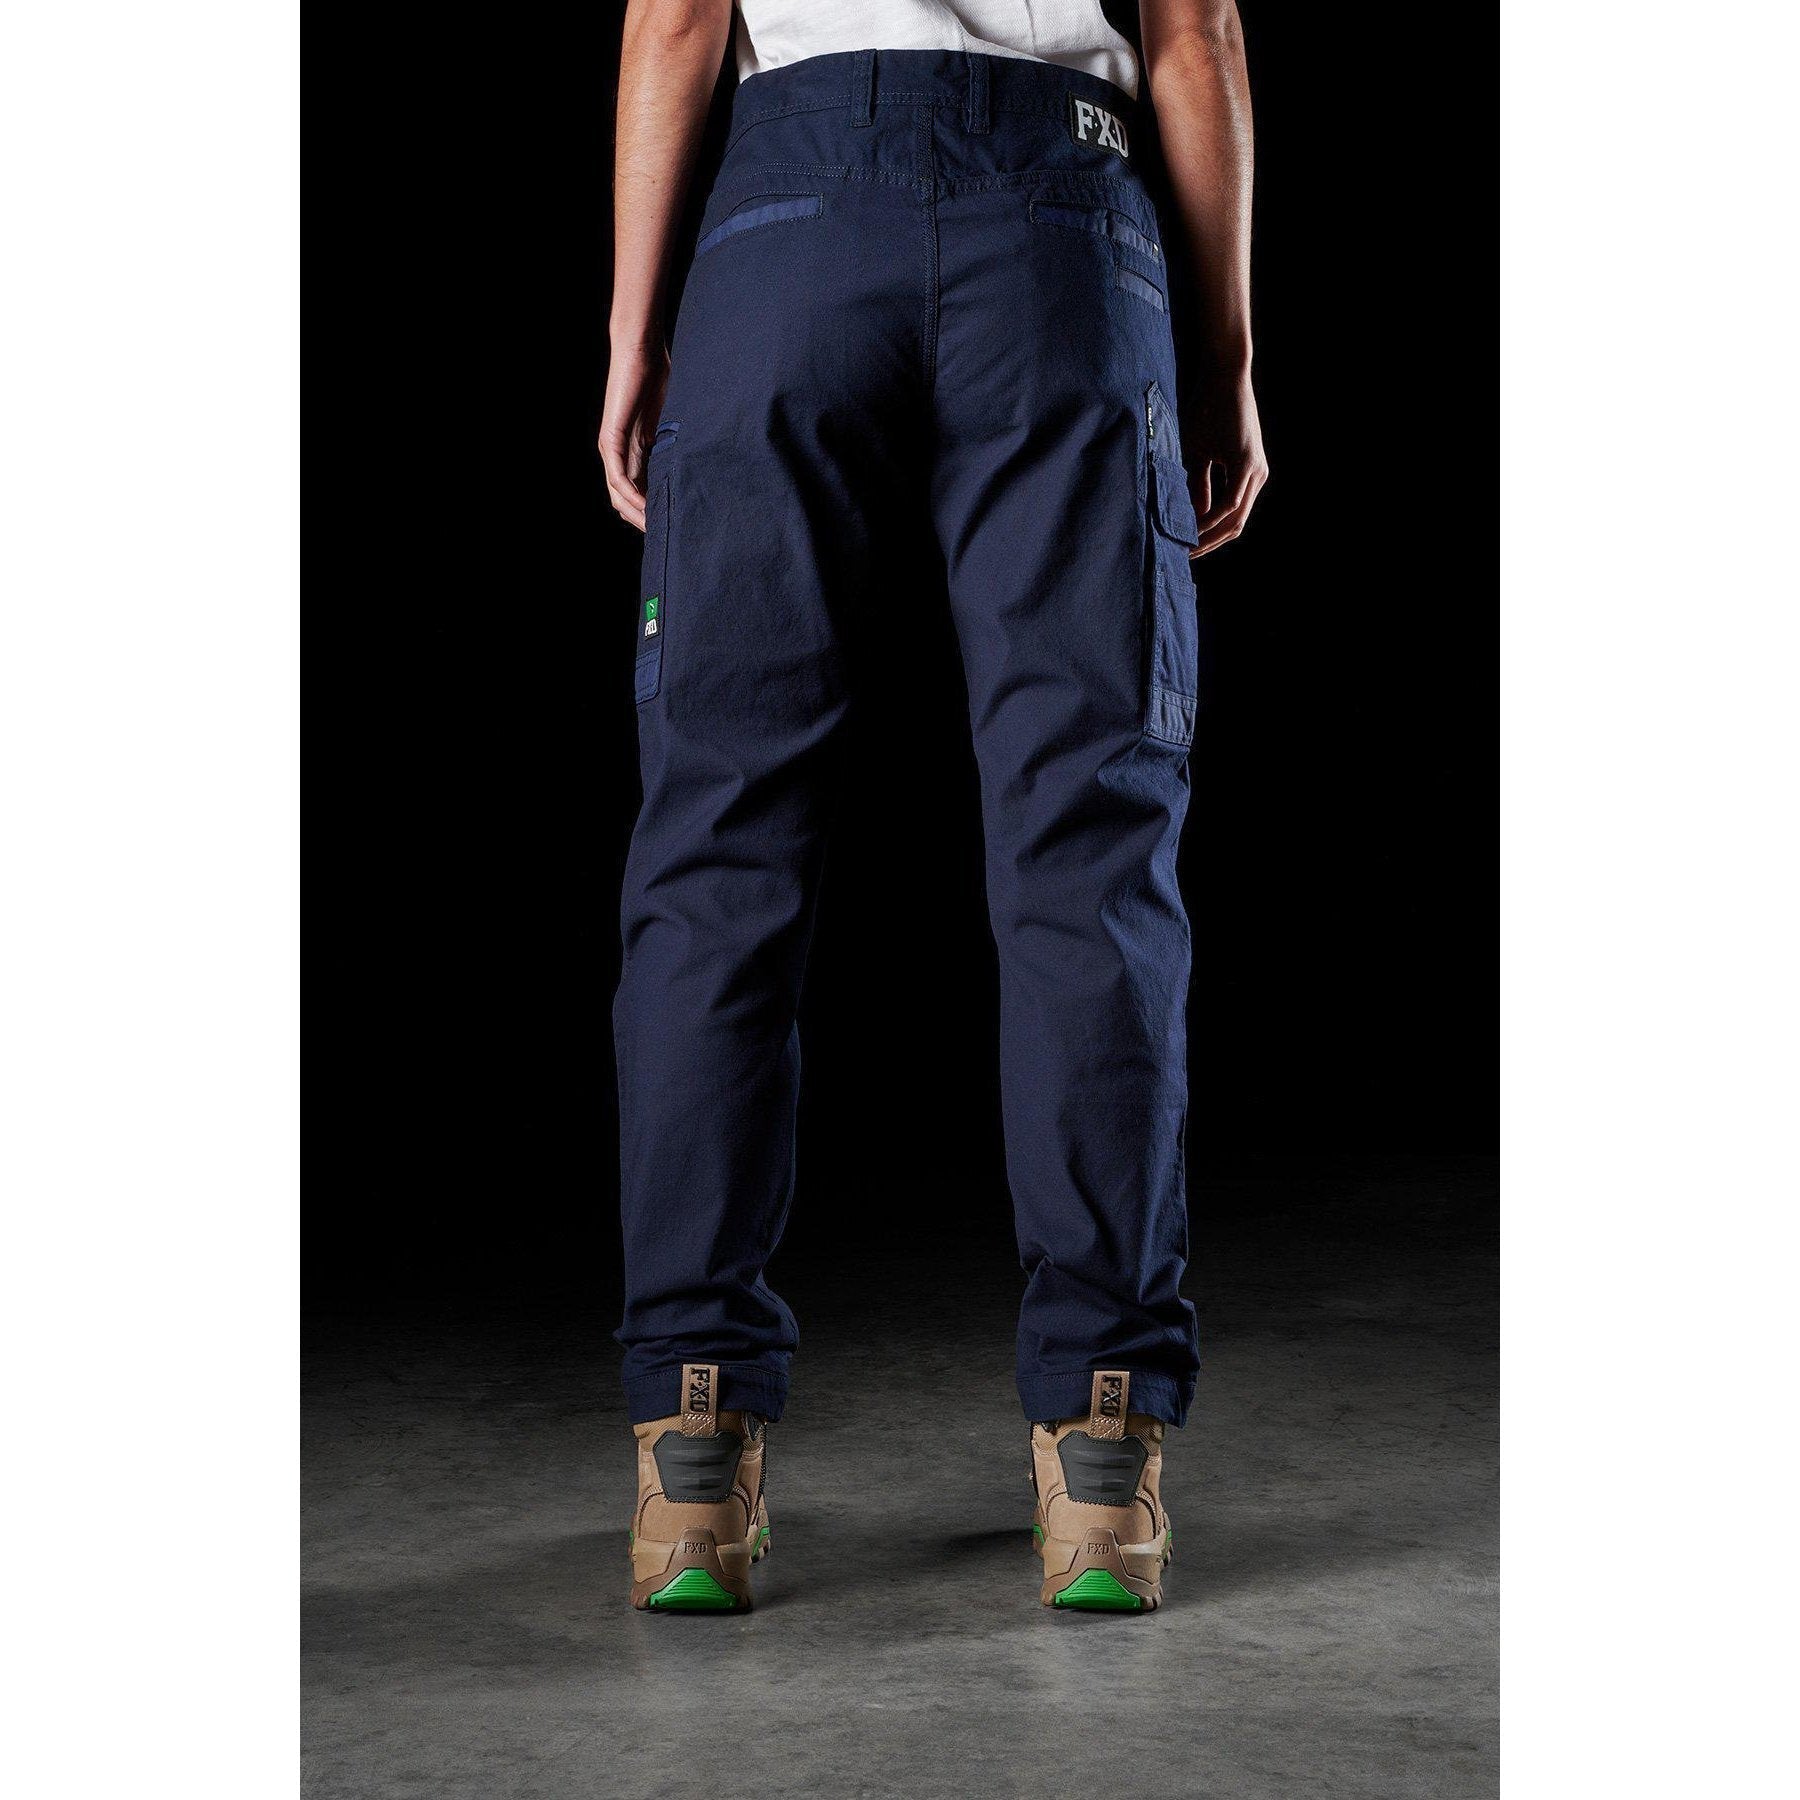 WP-4W FXD Womens Elastic Cuffed Cotton Work Pant